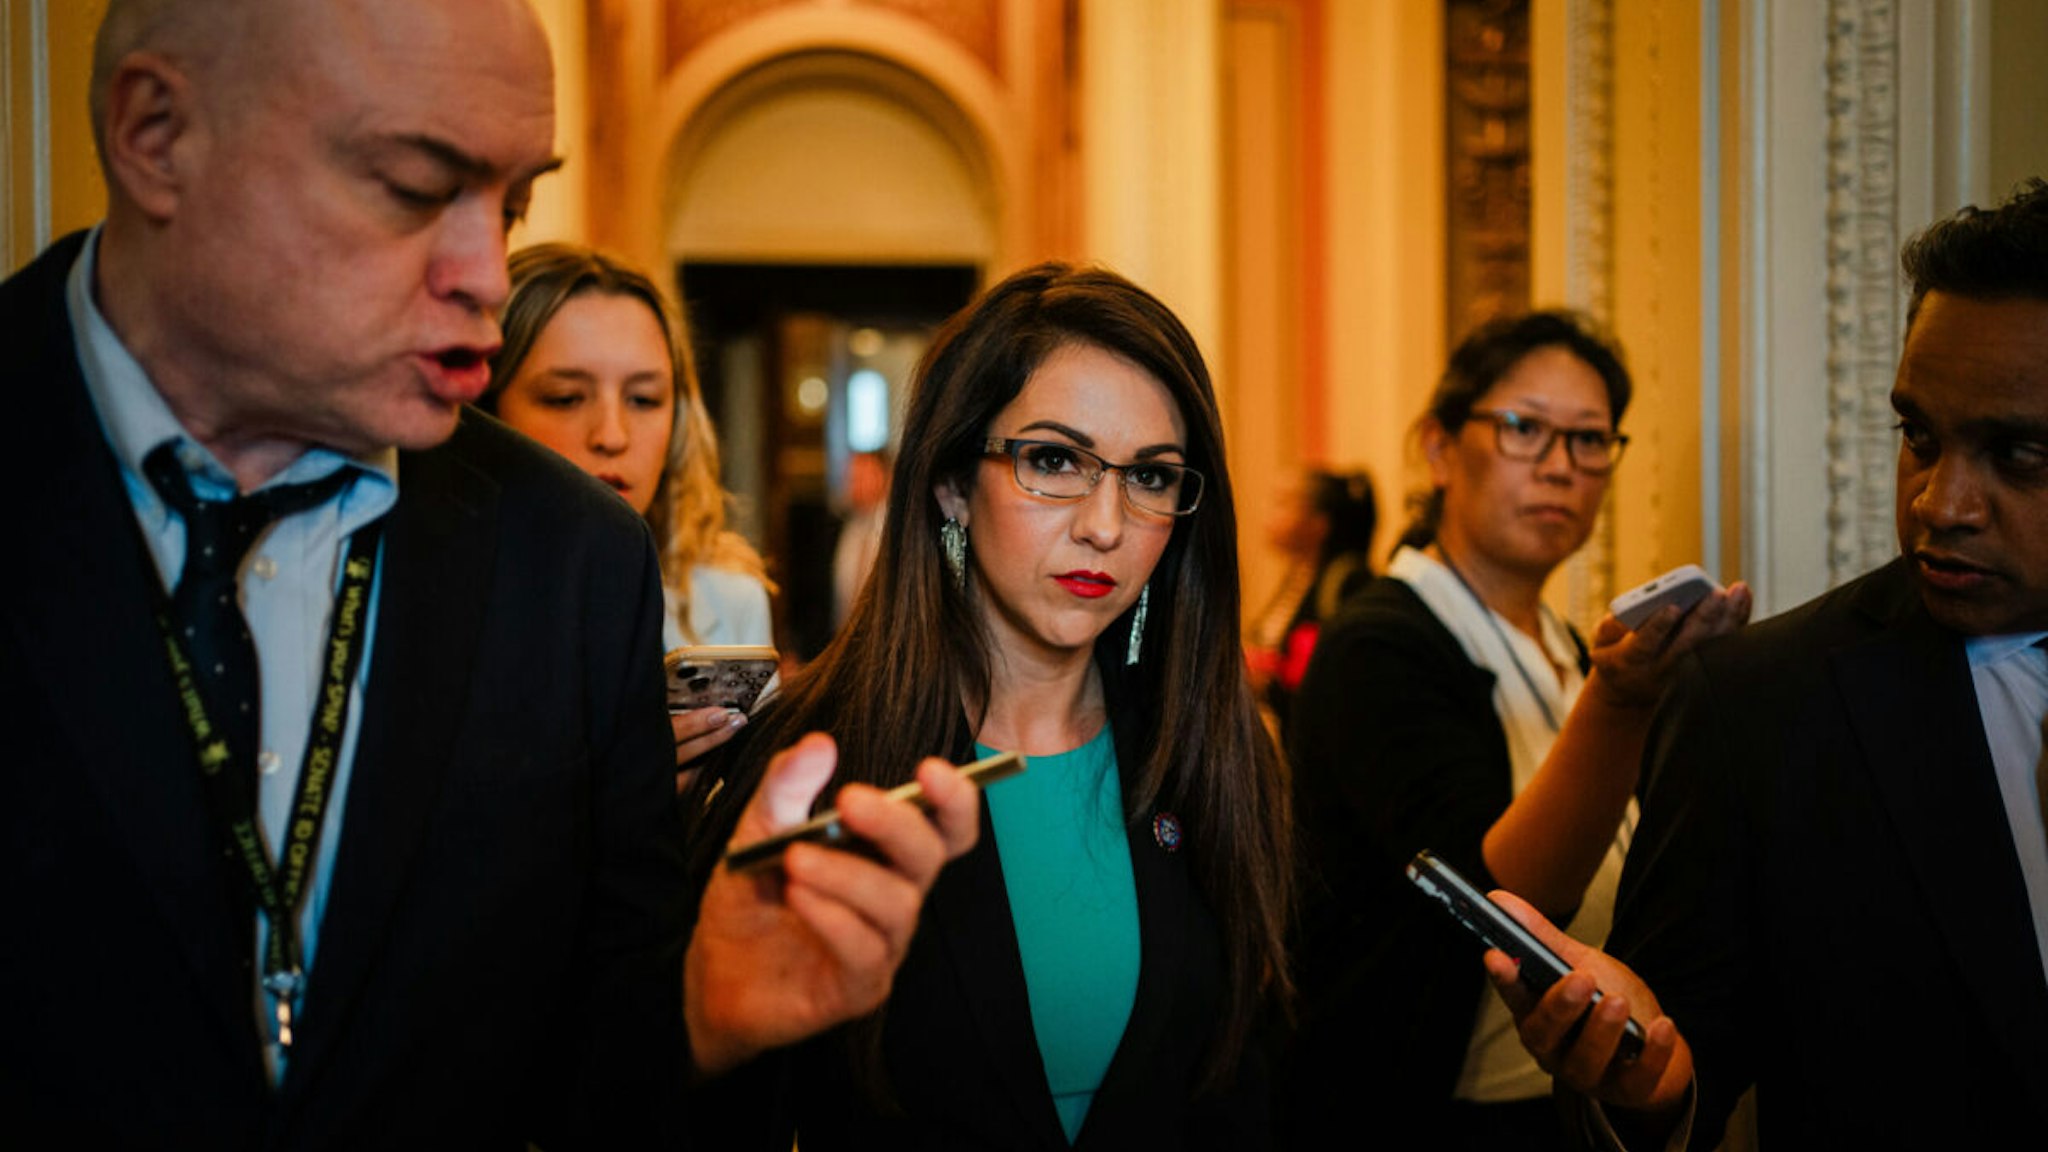 Rep. Lauren Boebert (R-CO) chats with reporters after leading the floor of the House Chamber at the U.S. Capitol on Wednesday, June 21, 2023 in Washington, DC.